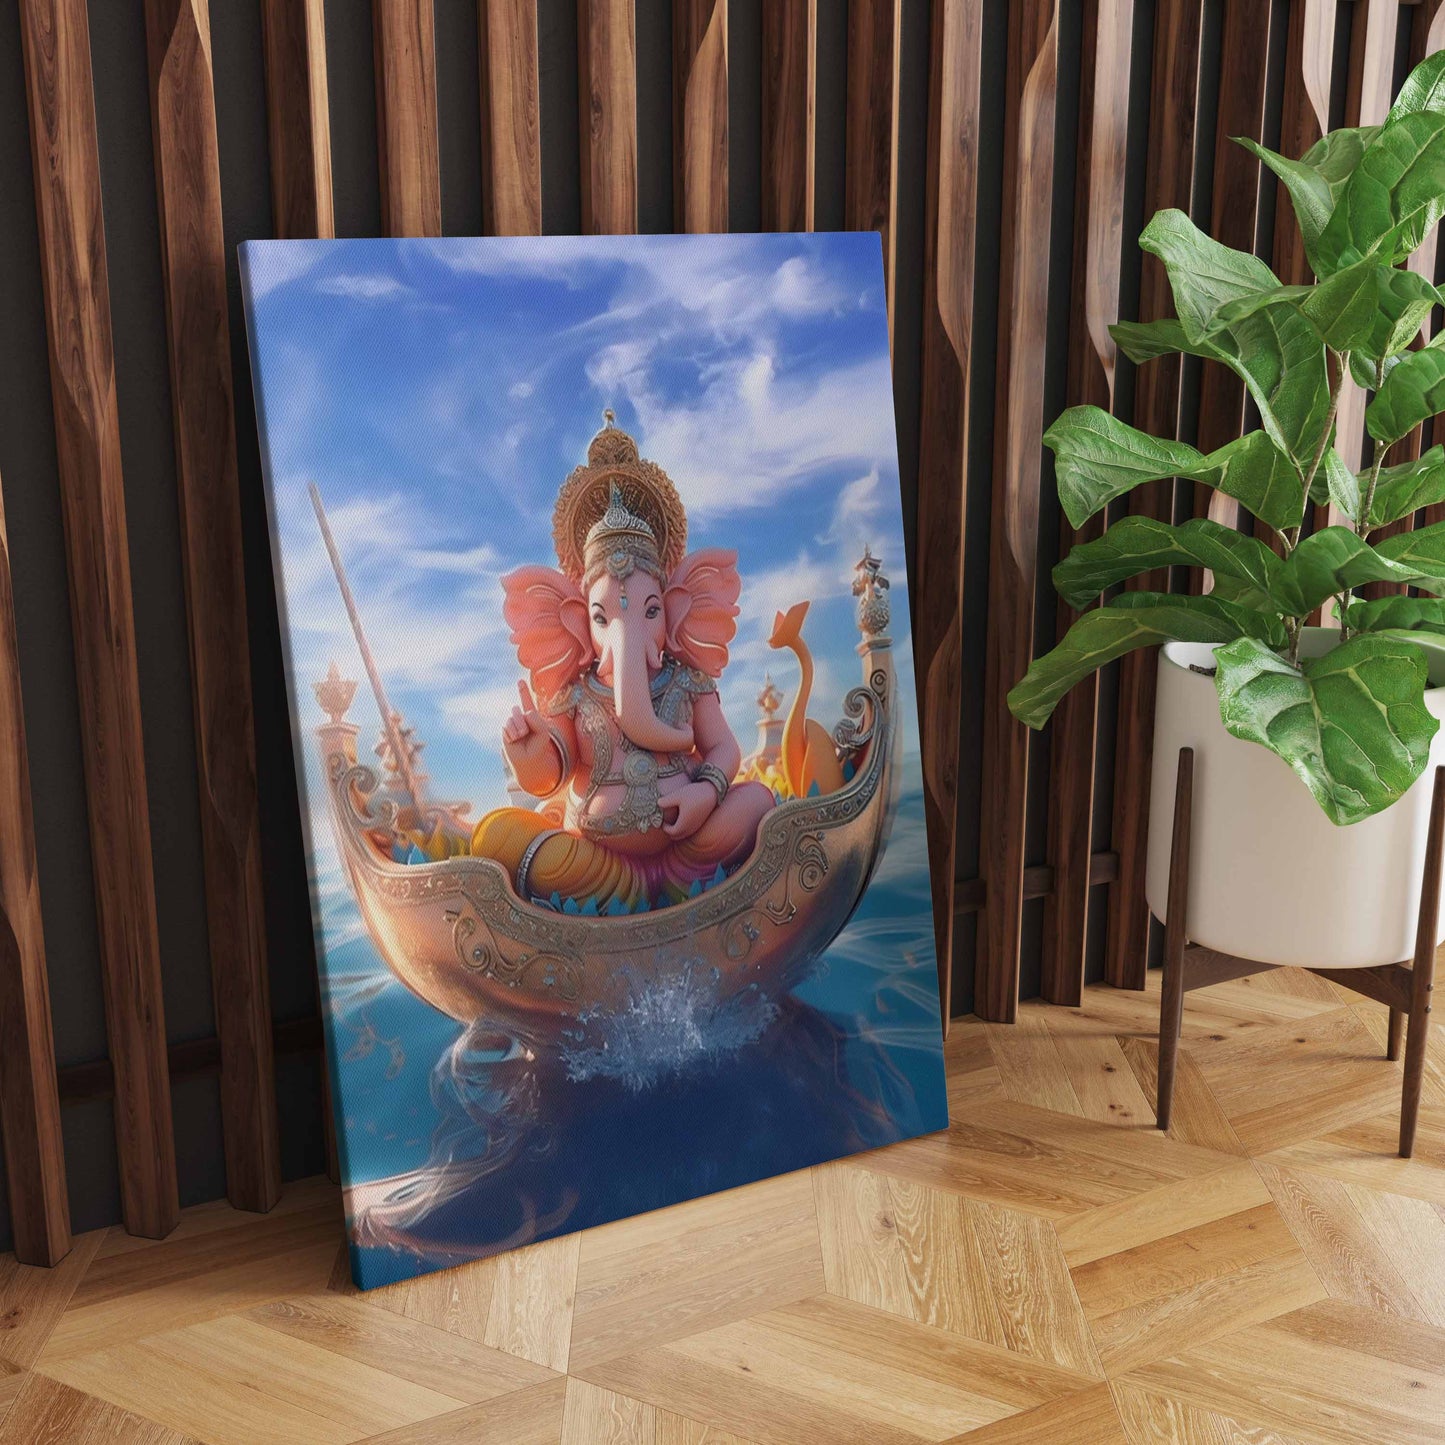 Divine Voyage: A Wall Art Featuring Lord Ganesh On A Boat - Embrace the Spiritual Journey Across Waters - S05E59